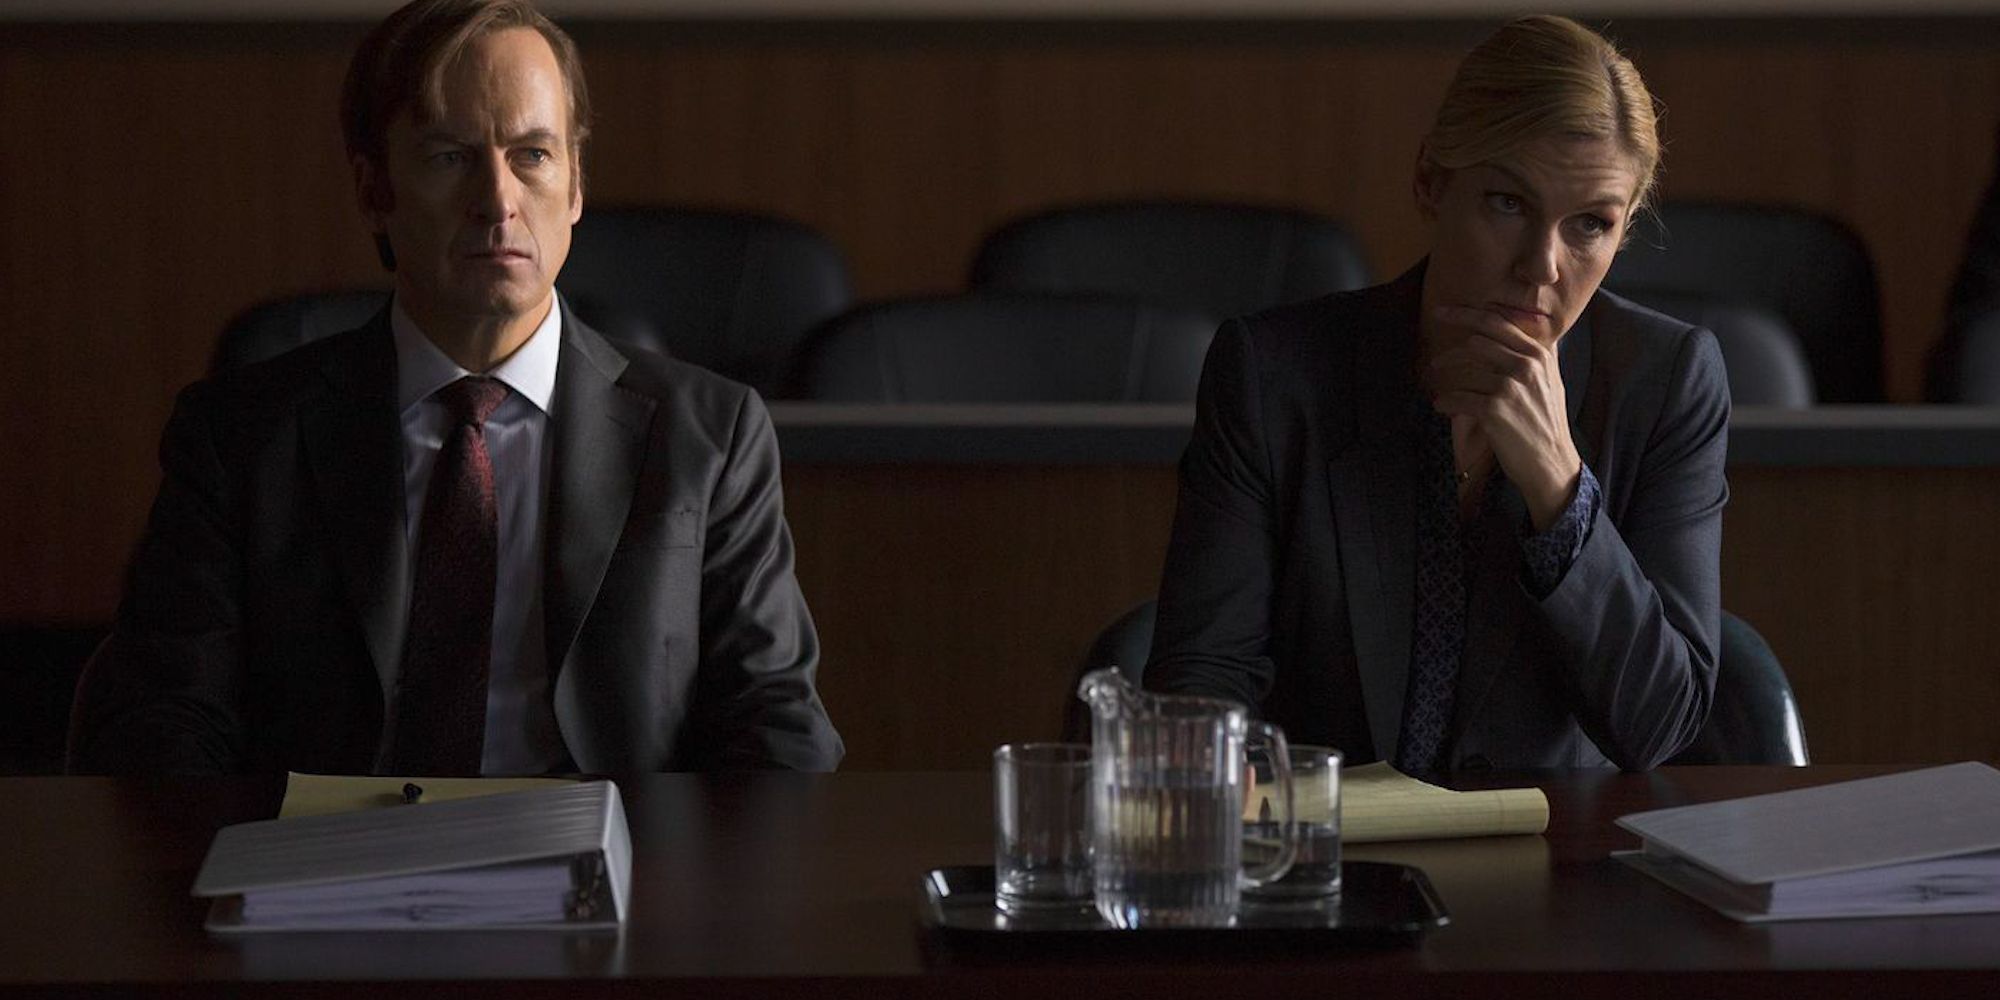 Saul Goodman and Kim Wexler as lawyers in Better Call Saul